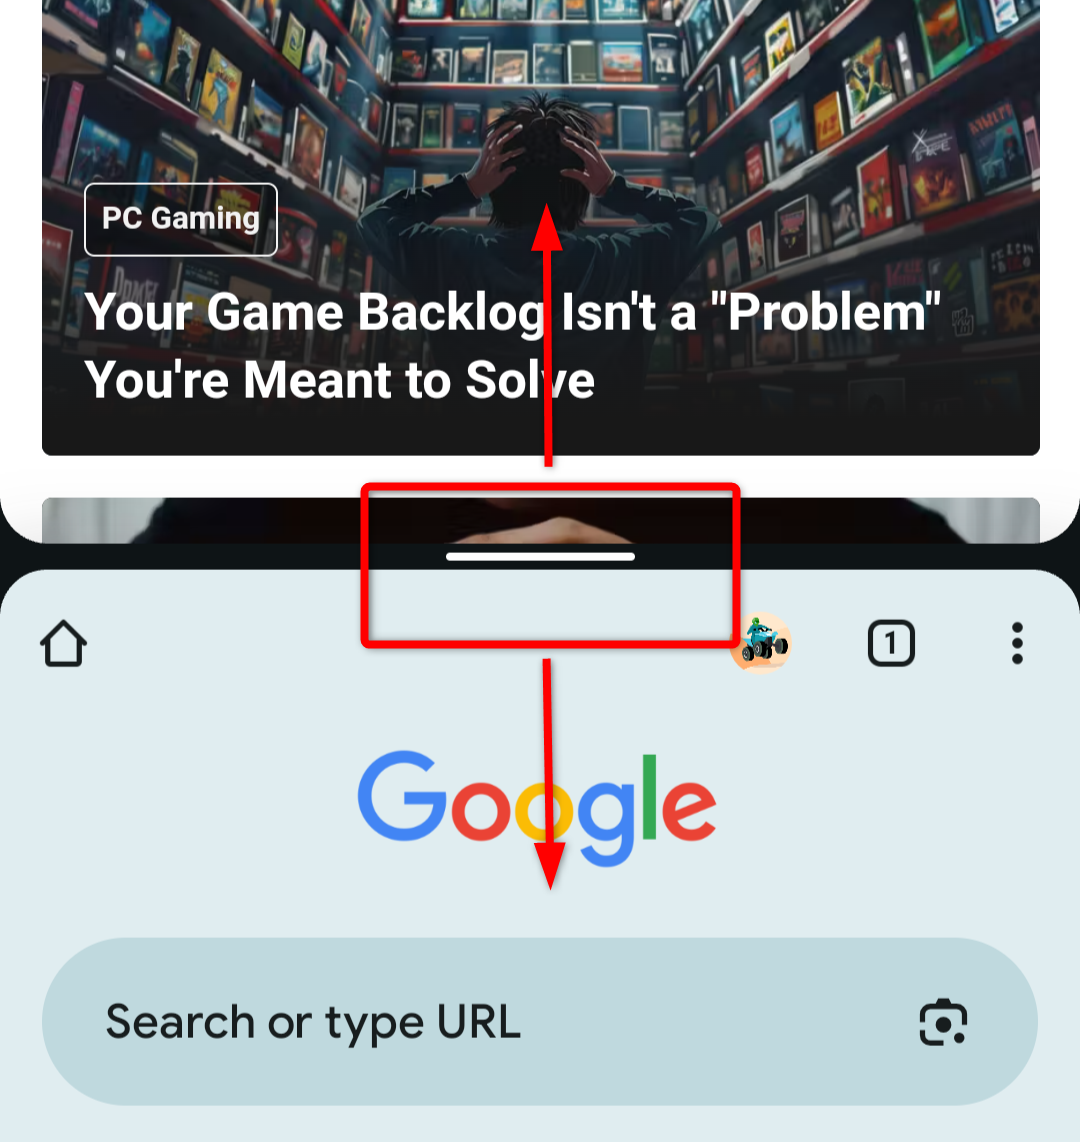 A screenshot showing how to switch from split screen to full screen mode on an Android phone.